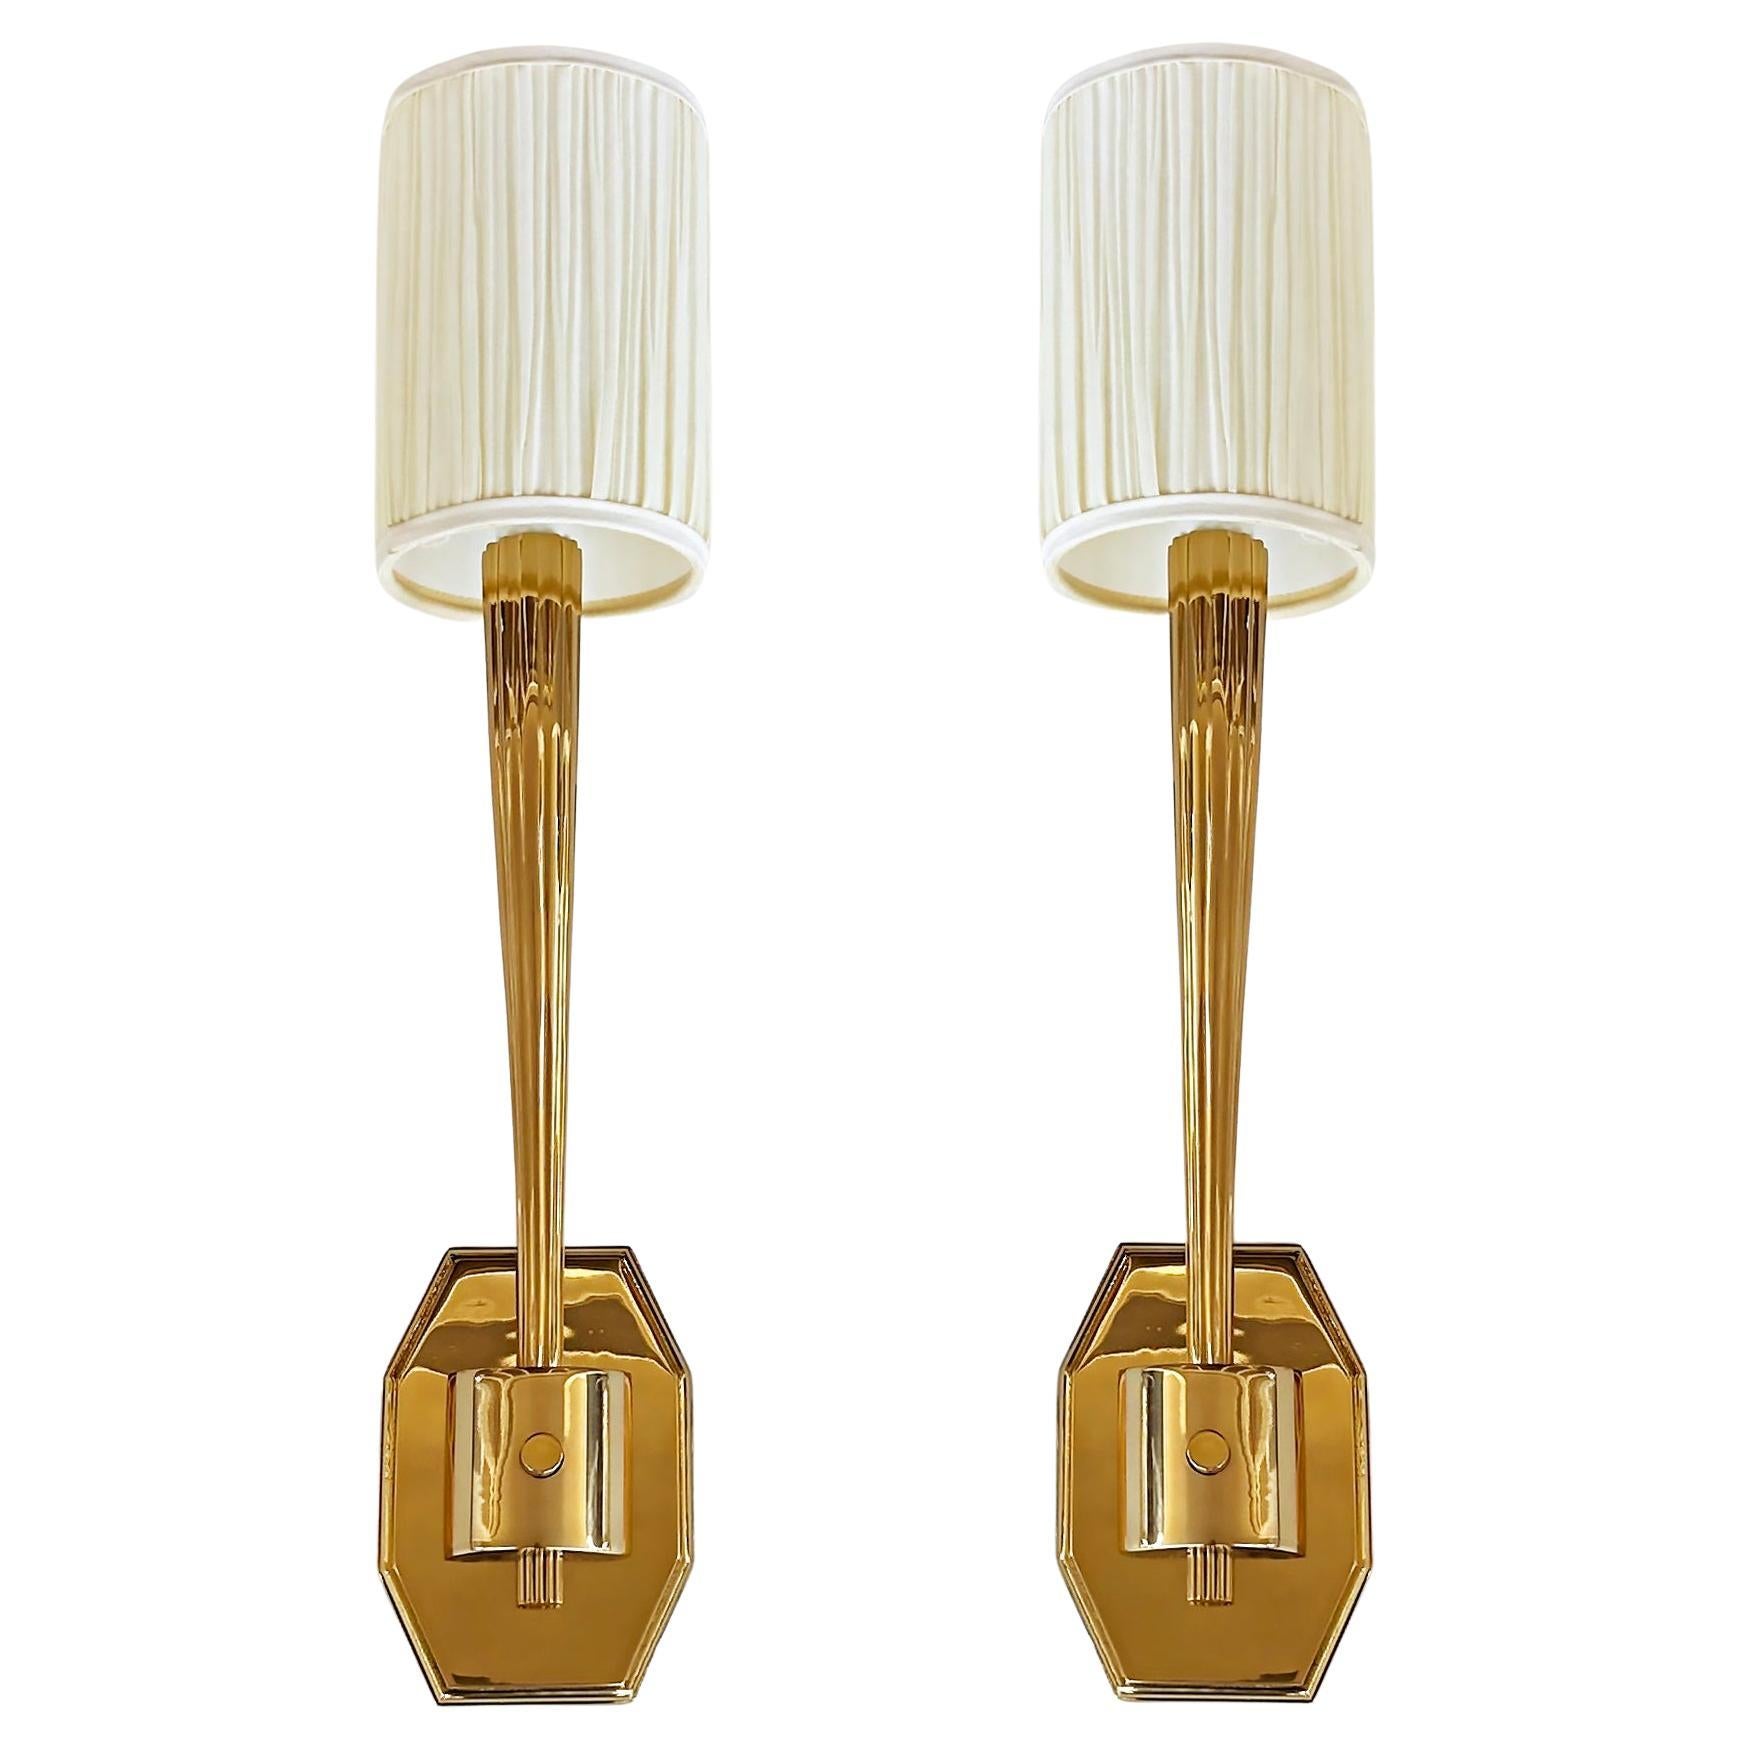 Louis Baldinger & Sons Brass Wall Sconces with Pleated Shades, Pair